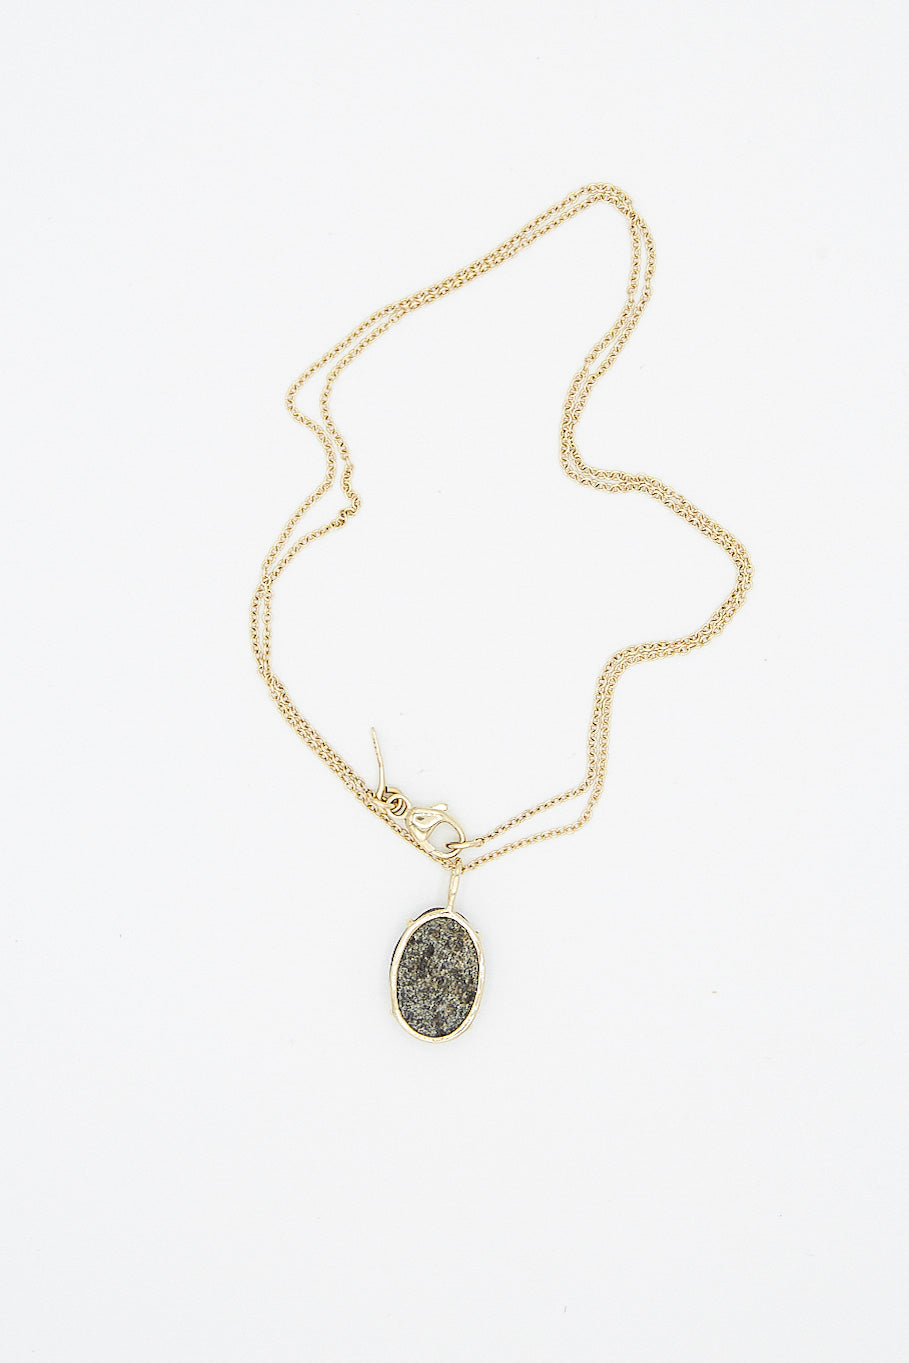 A Mary MacGill 14K Floating Necklace in Block Island Stone 16" Chain with a black stone also known as the Block Island Stone.